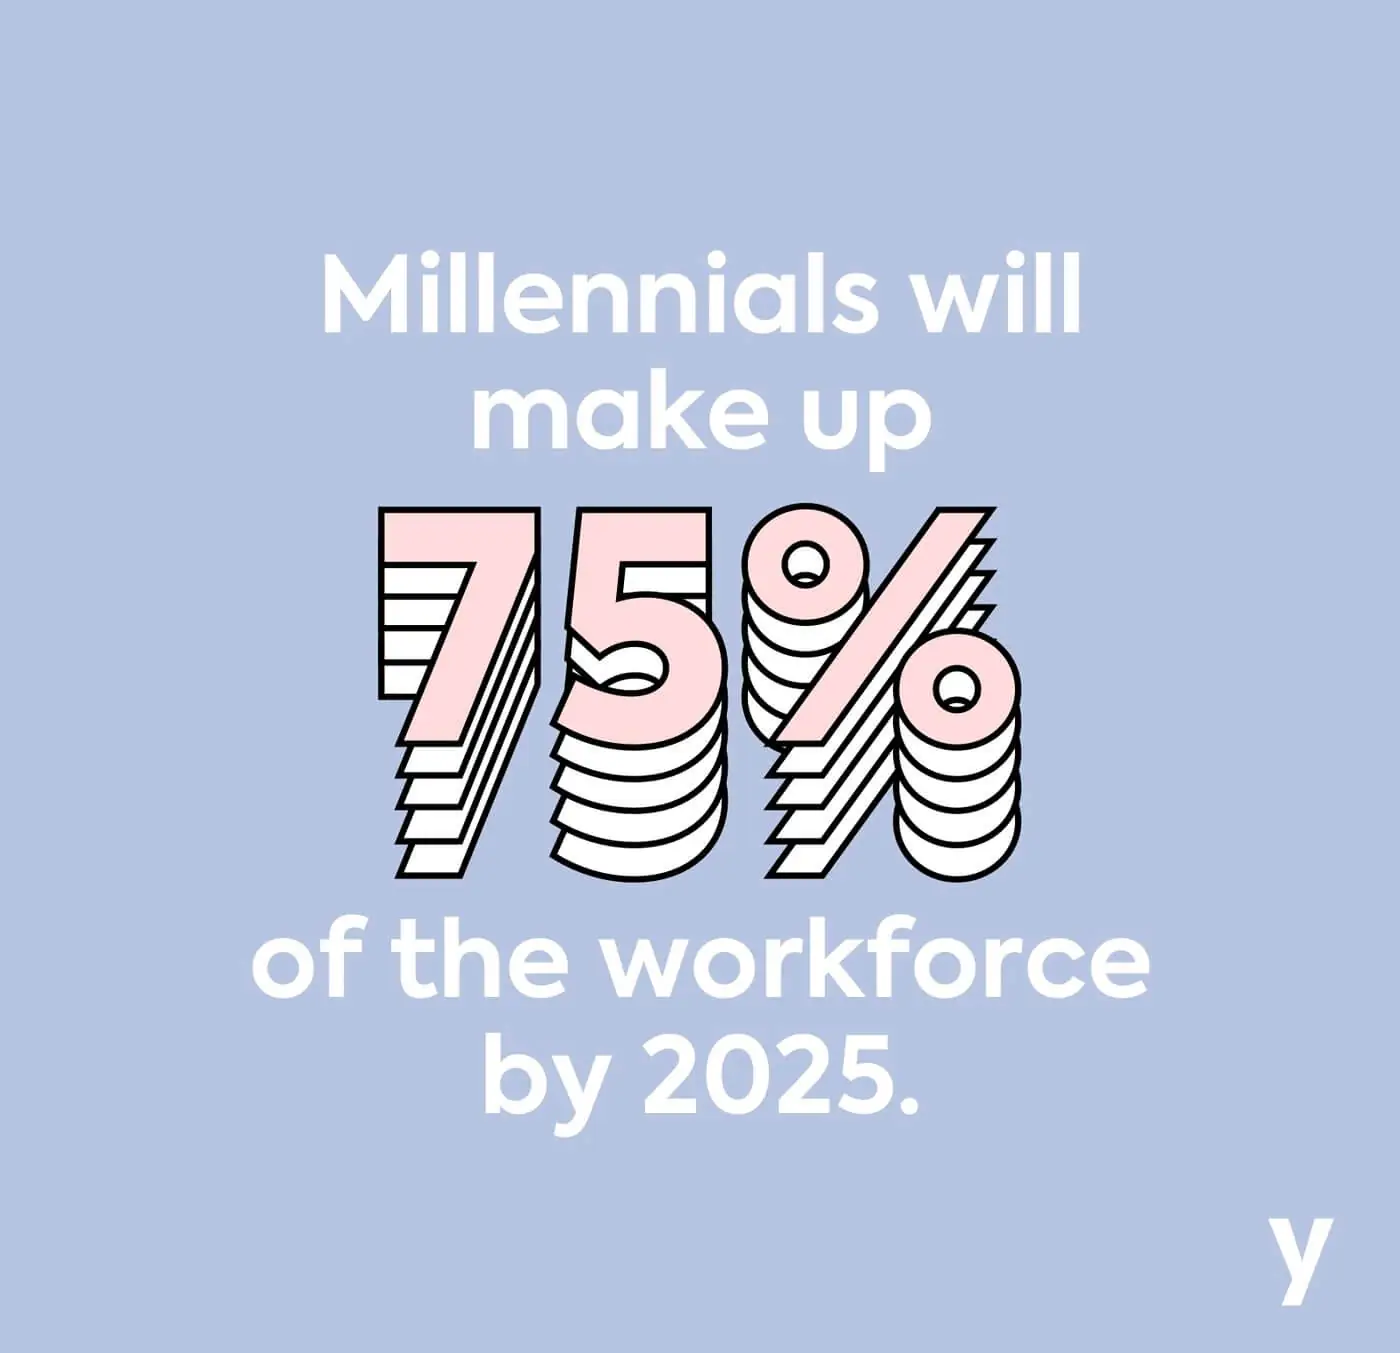 Millennials will make up 75% of the workforce by 2025.